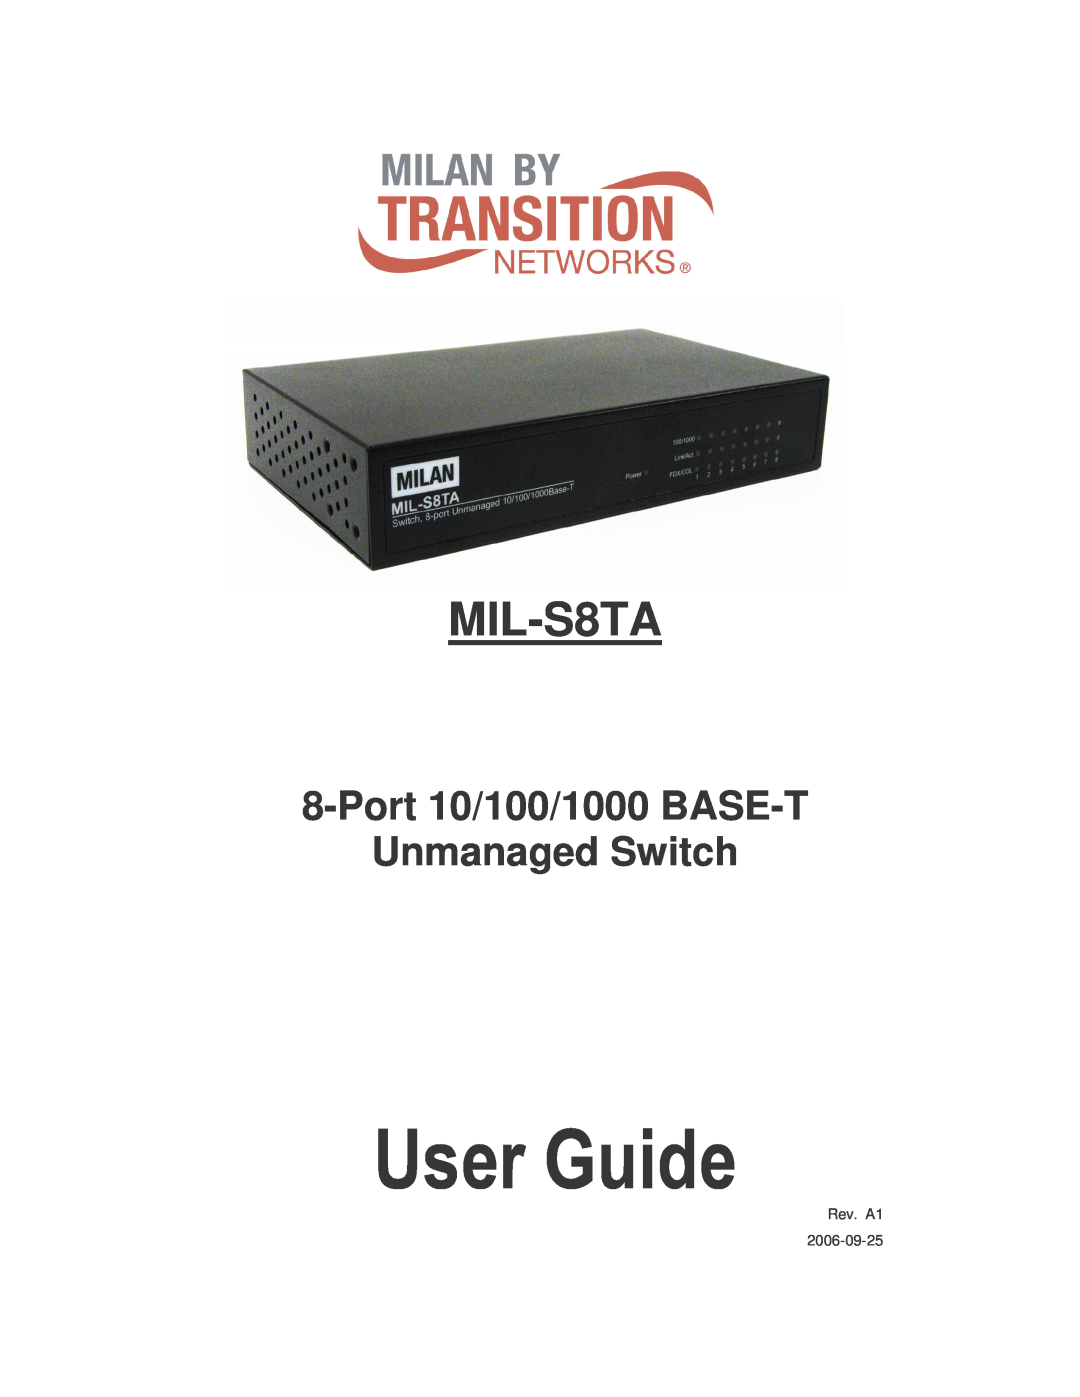 Transition Networks MIL-S8TA manual Port 10/100/1000 BASE-T Unmanaged Switch, User Guide, Rev. A1 